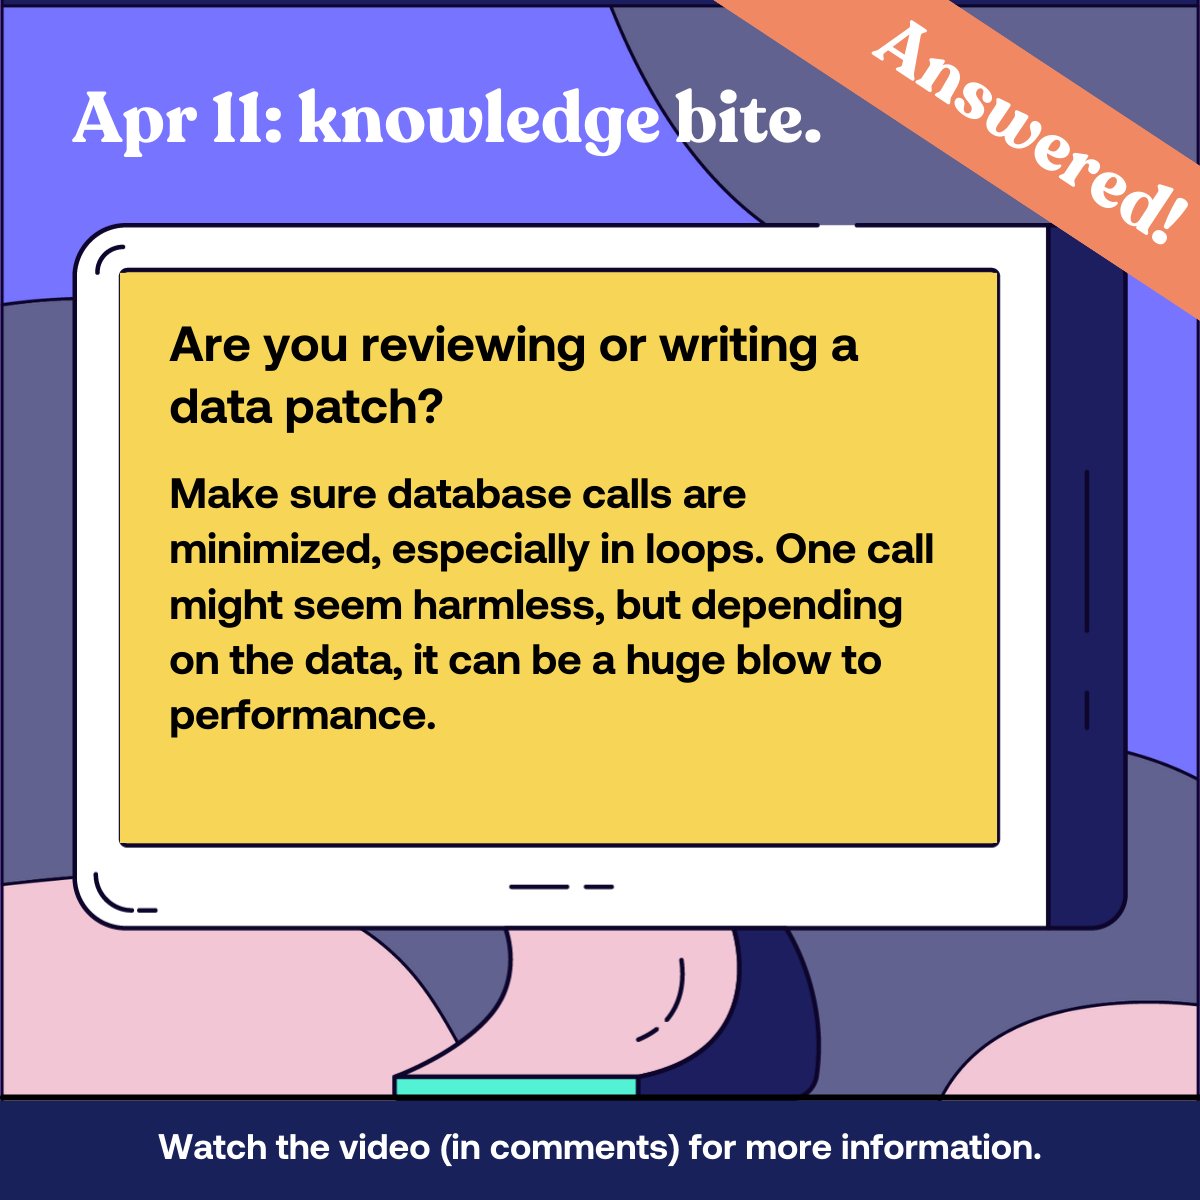 Are you reviewing or writing a data patch?
ℹ Watch the explanation video to learn more (Link in comments).
#swiftotter #magento #magento2 #magentodeveloper #adobecommerce #weeklypracticequestion